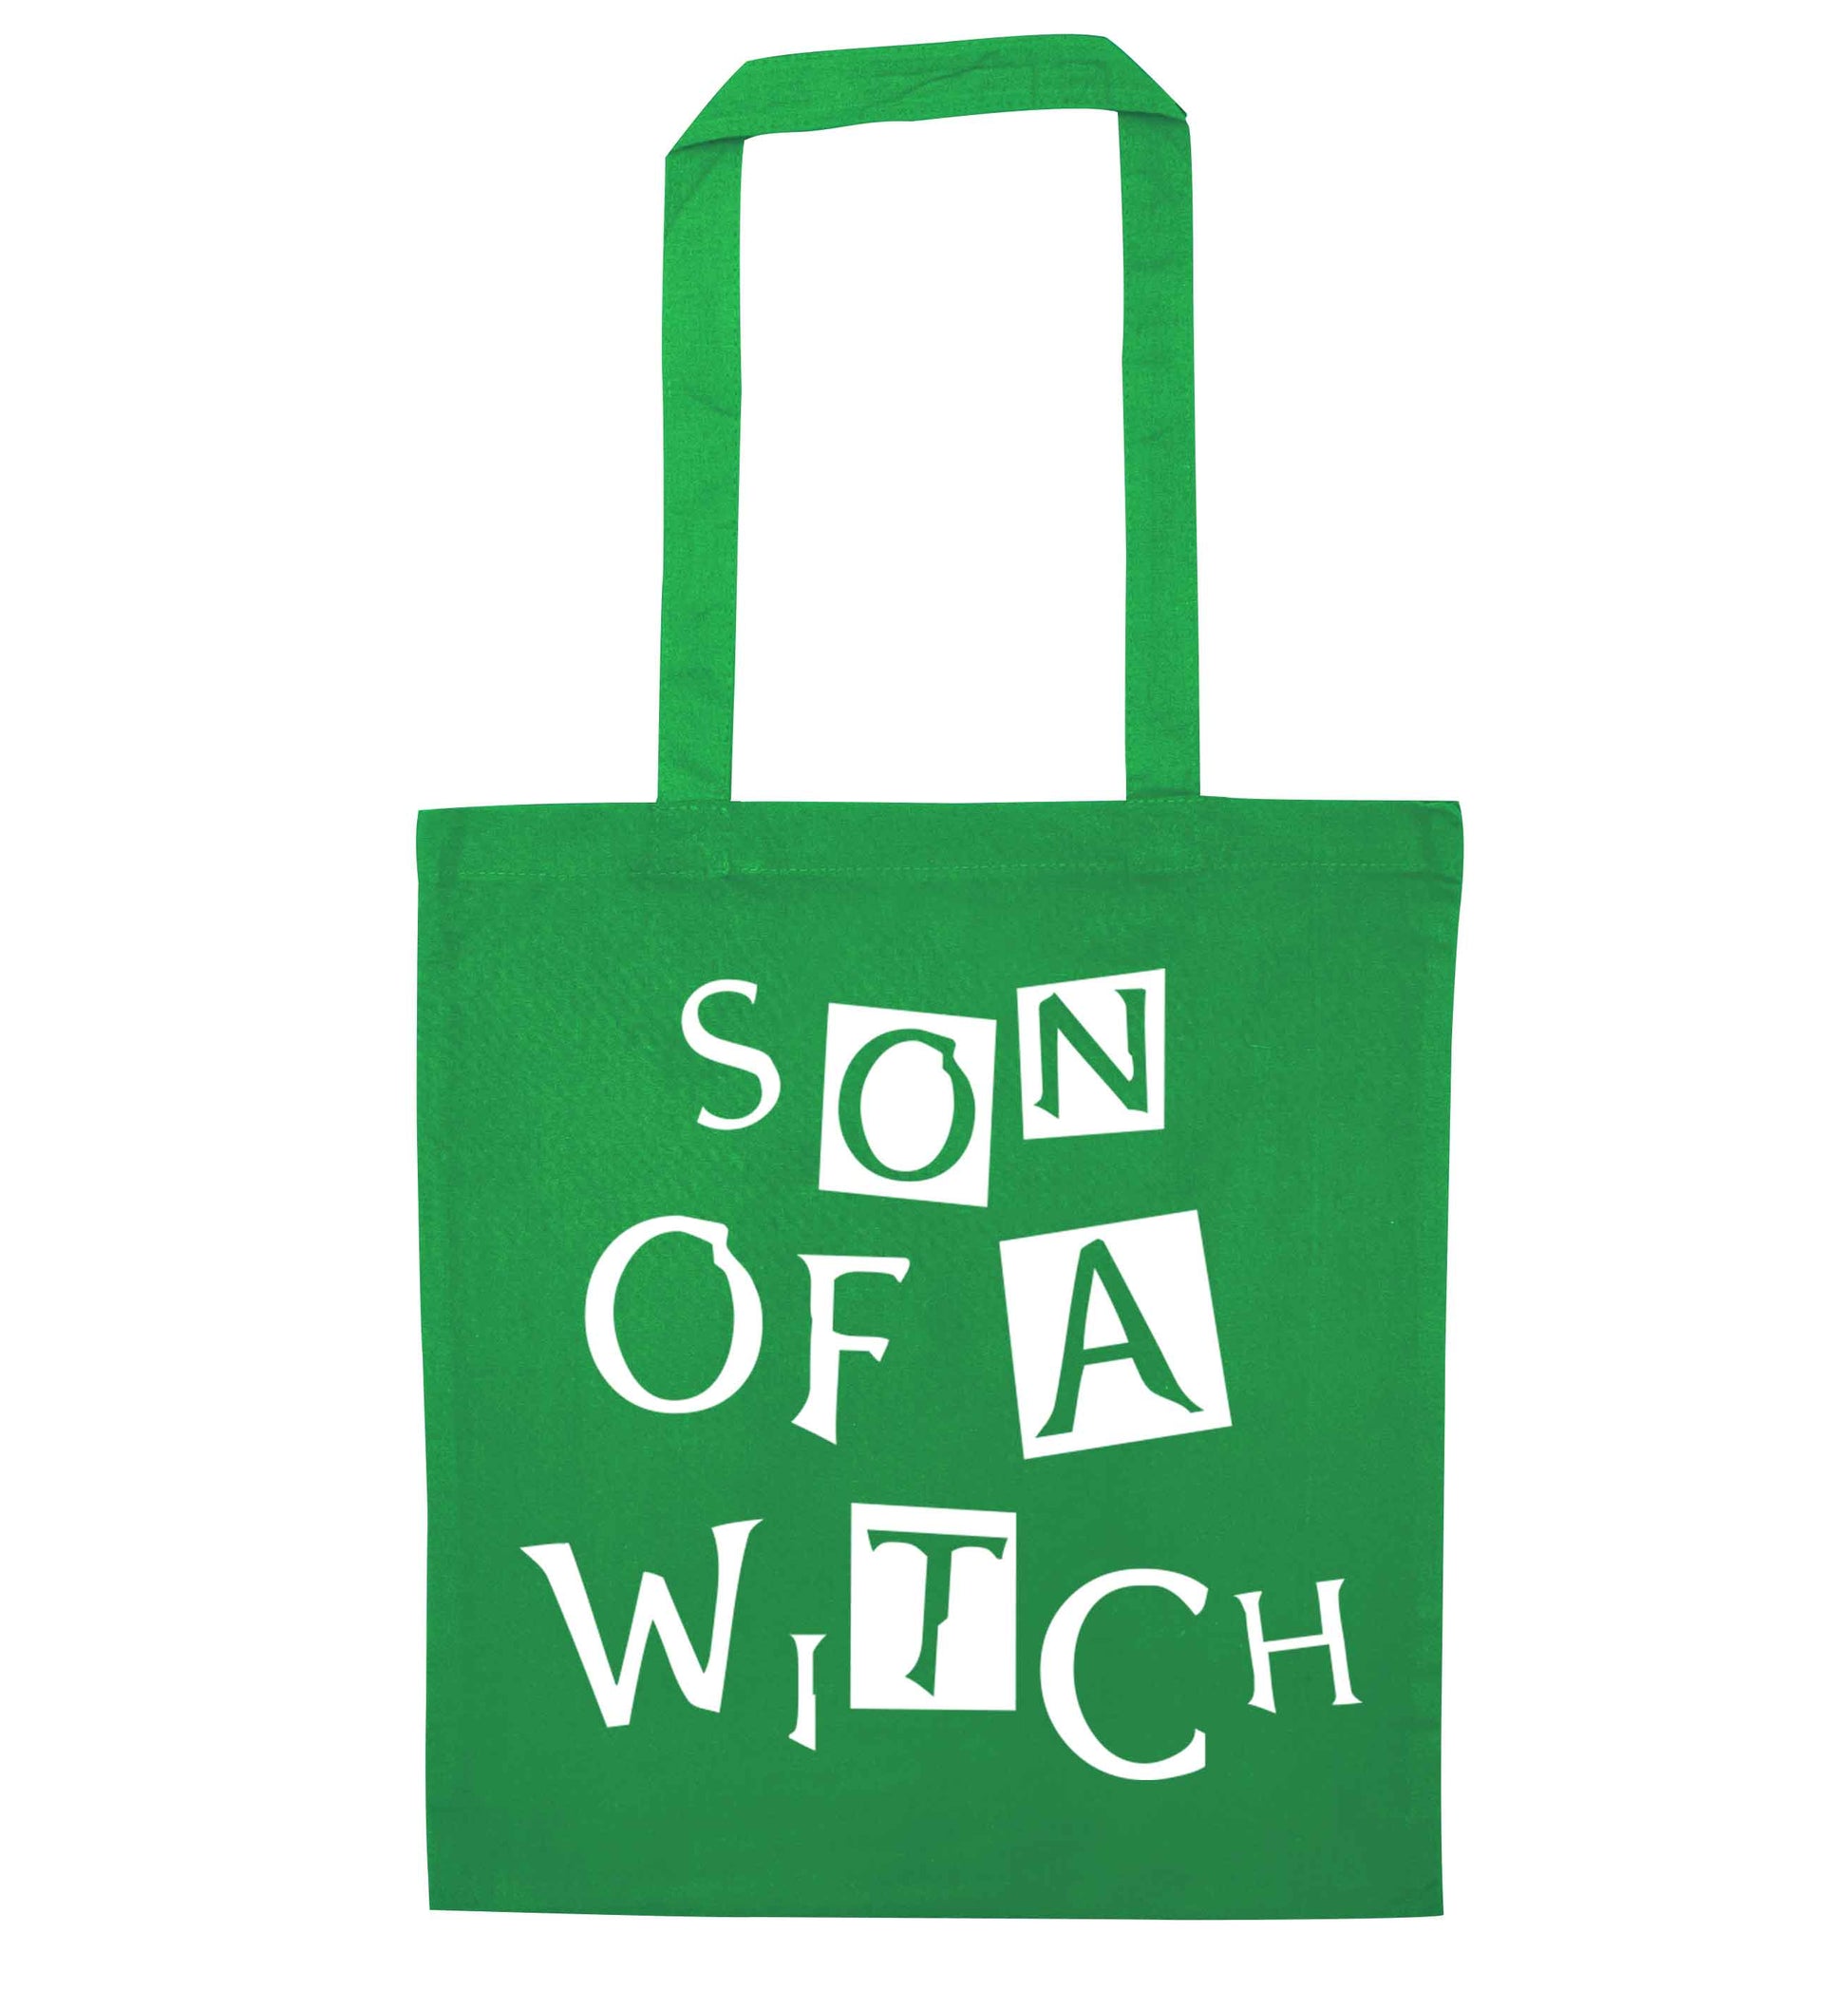 Son of a witch green tote bag